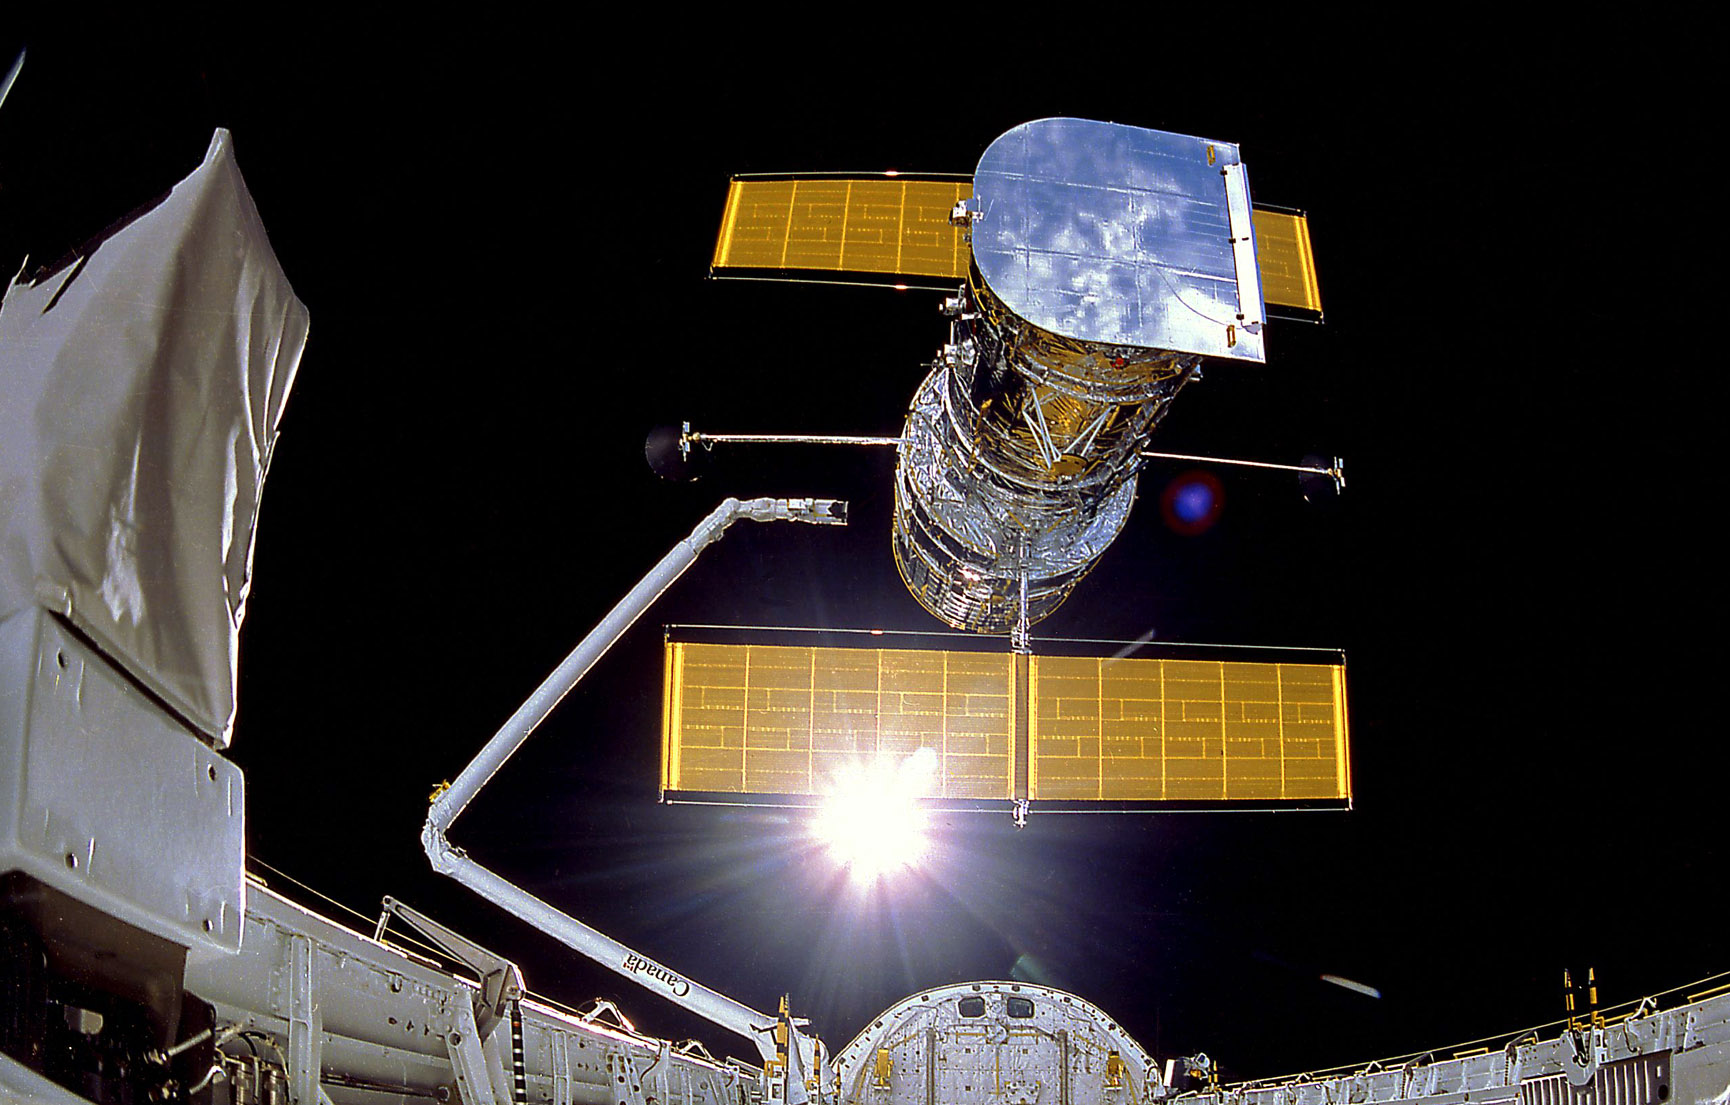 IMAX view of the release of the Hubble Space Telescope (HST) in April 1990. Photo Credit: NASA